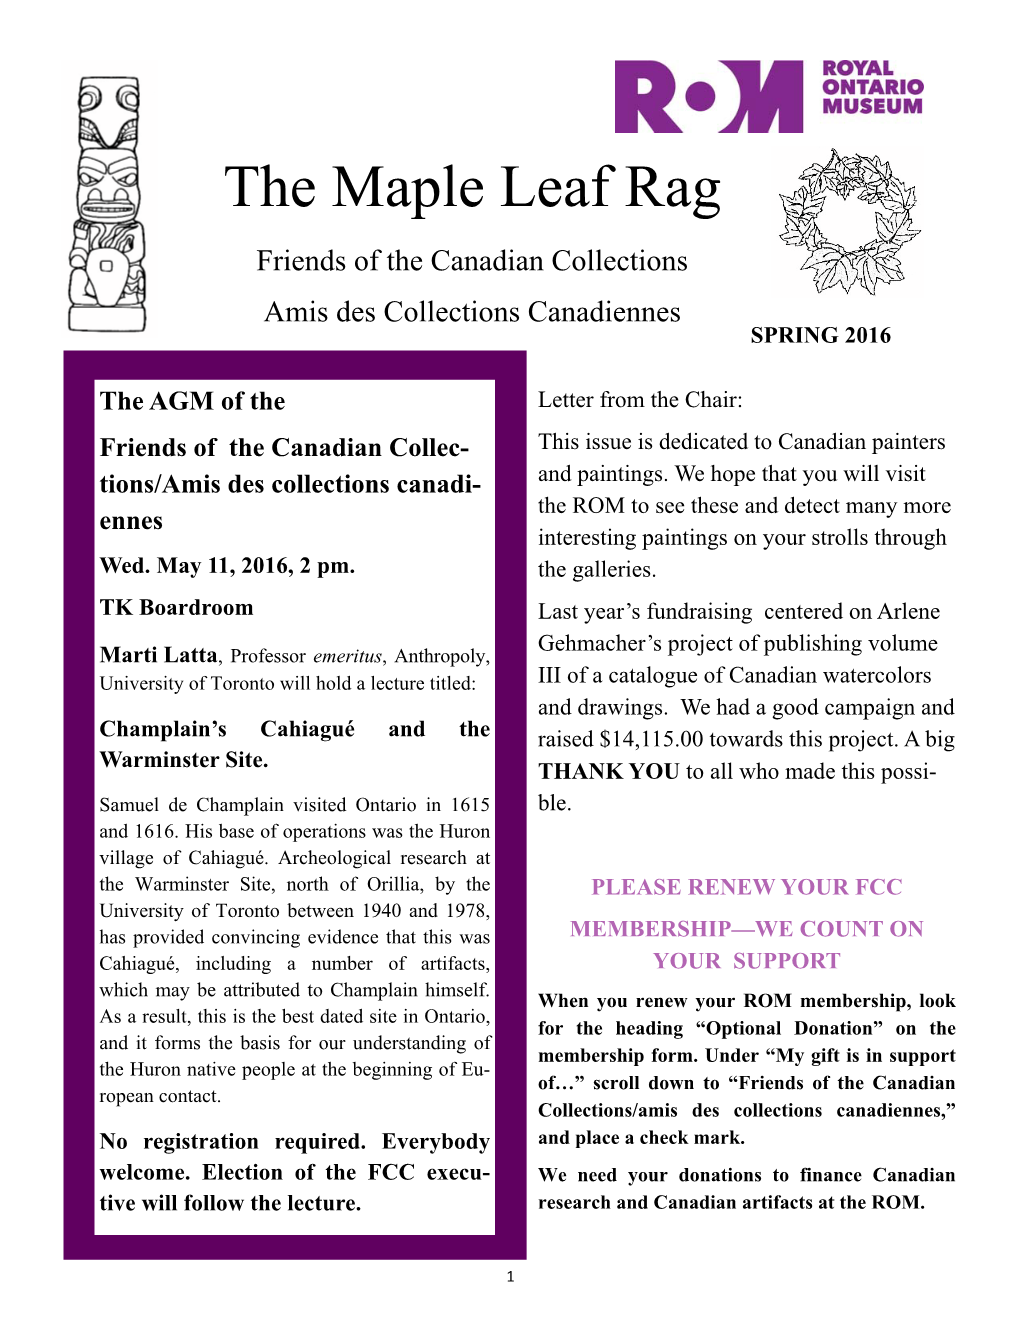 The Maple Leaf Rag Friends of the Canadian Collections Amis Des Collections Canadiennes SPRING 2016